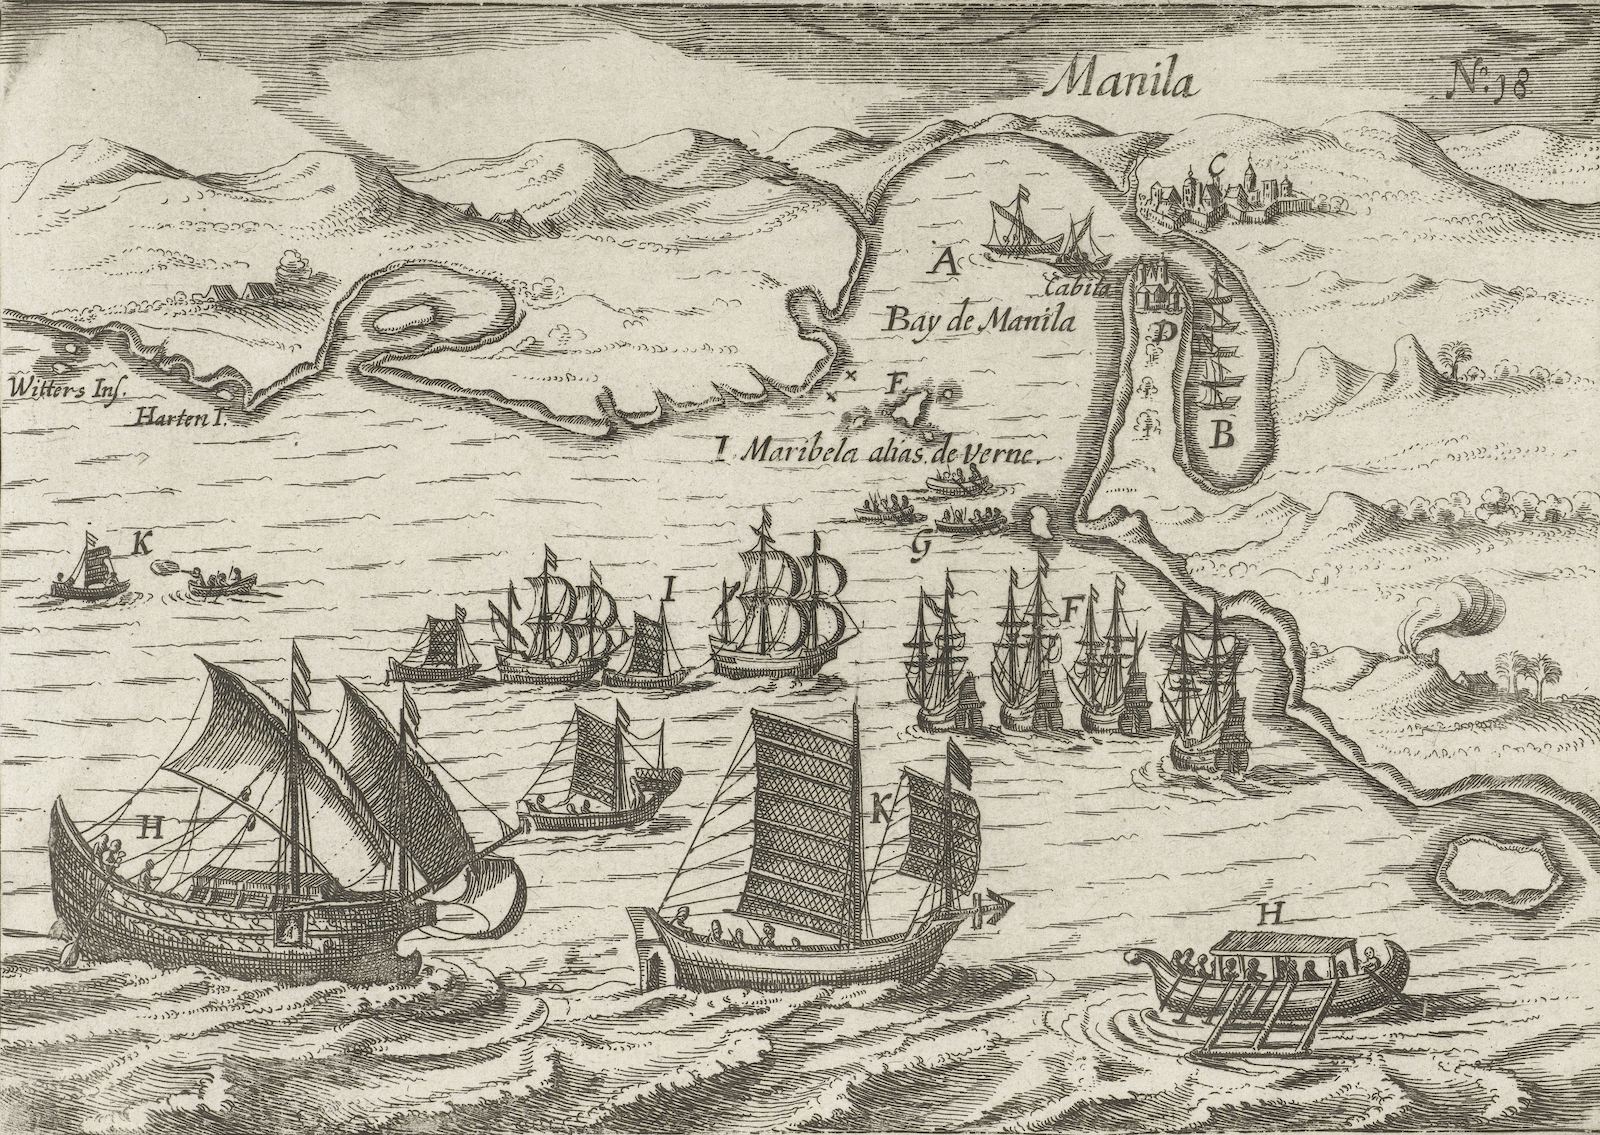 Arrival at Manila Bay in the Philippines, 1616, anonymous, c. 1646. Rijksmuseum. Public Domain.